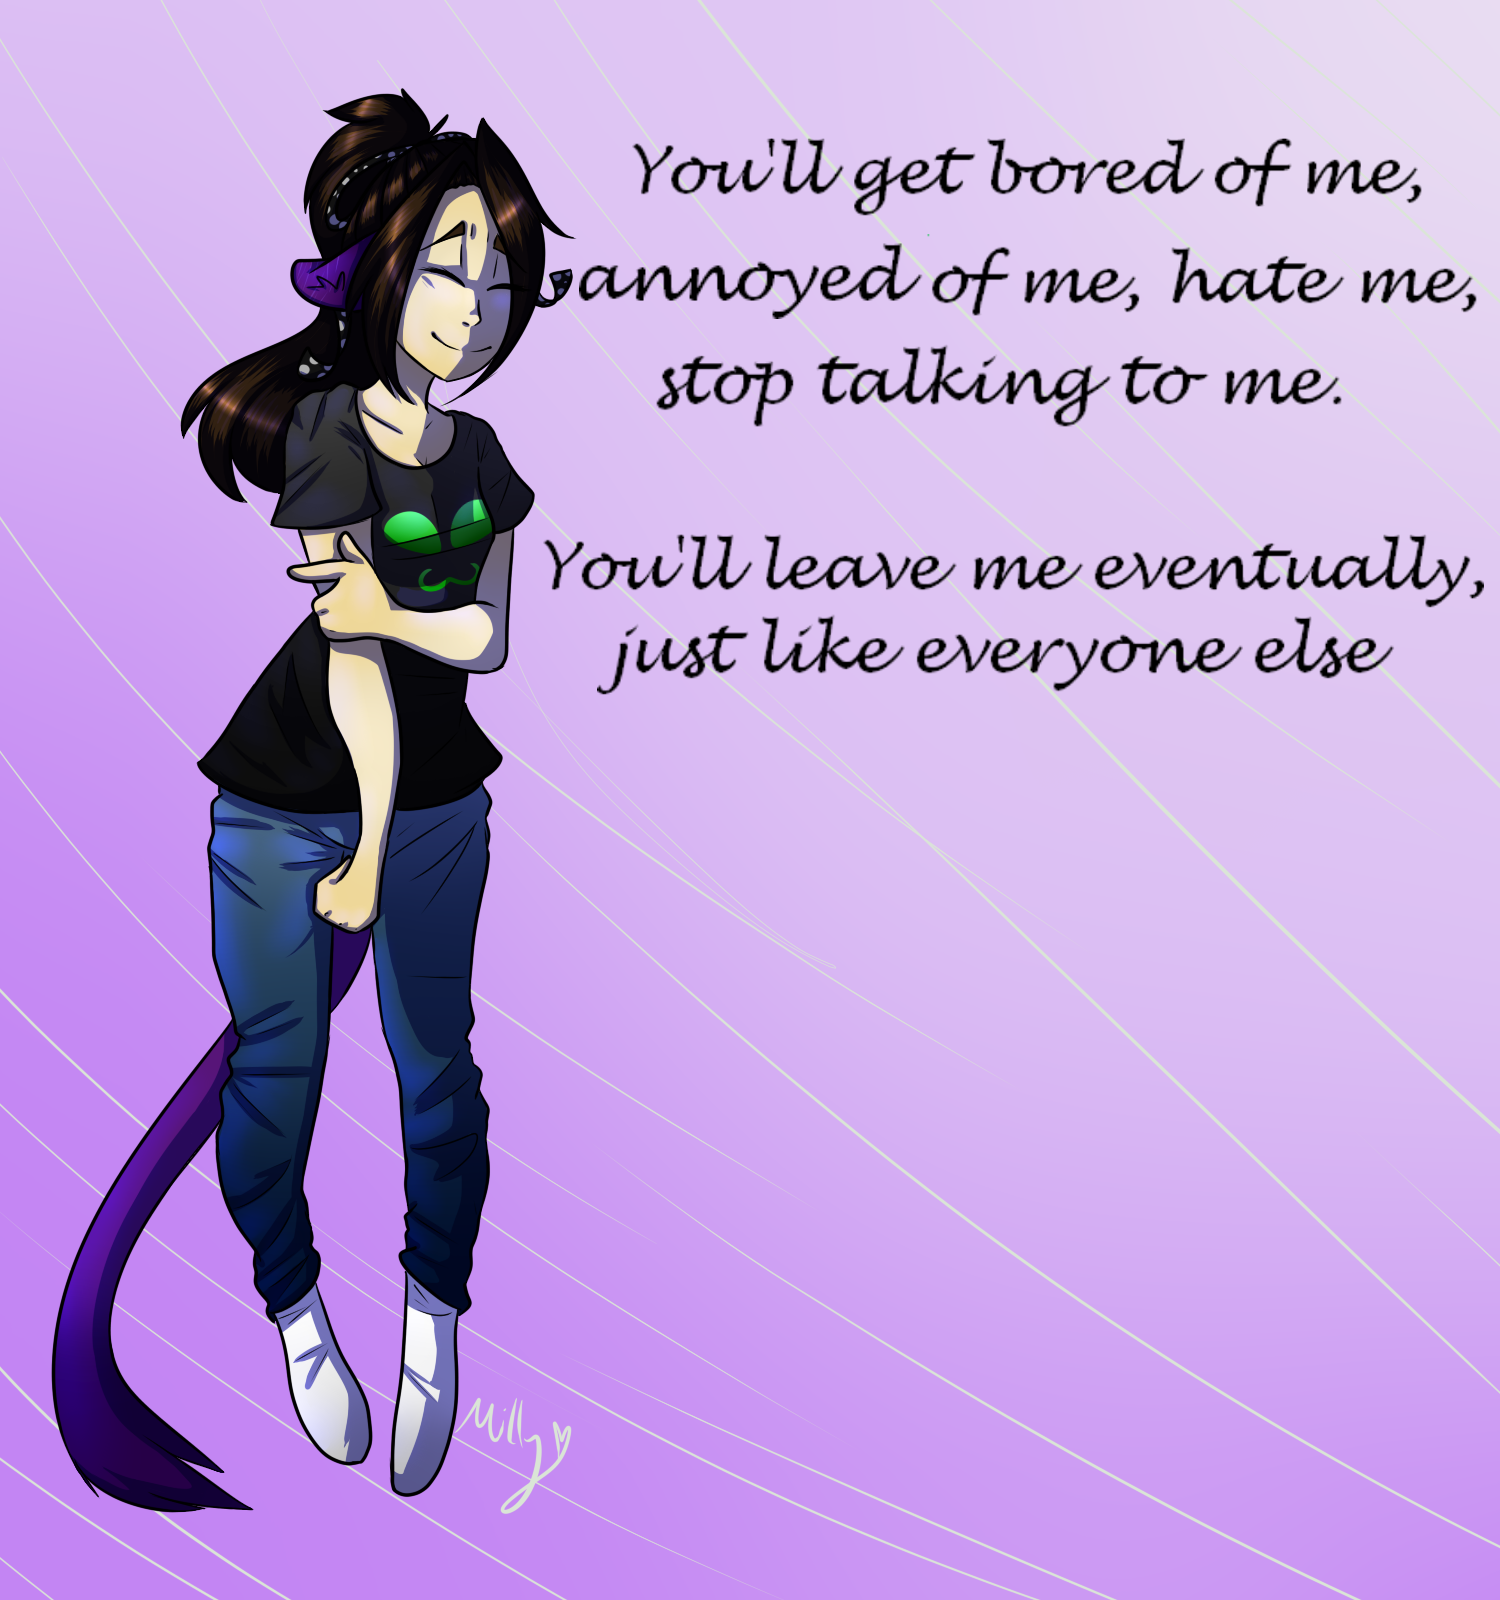 Bored Of Me By Millymop585 On Deviantart